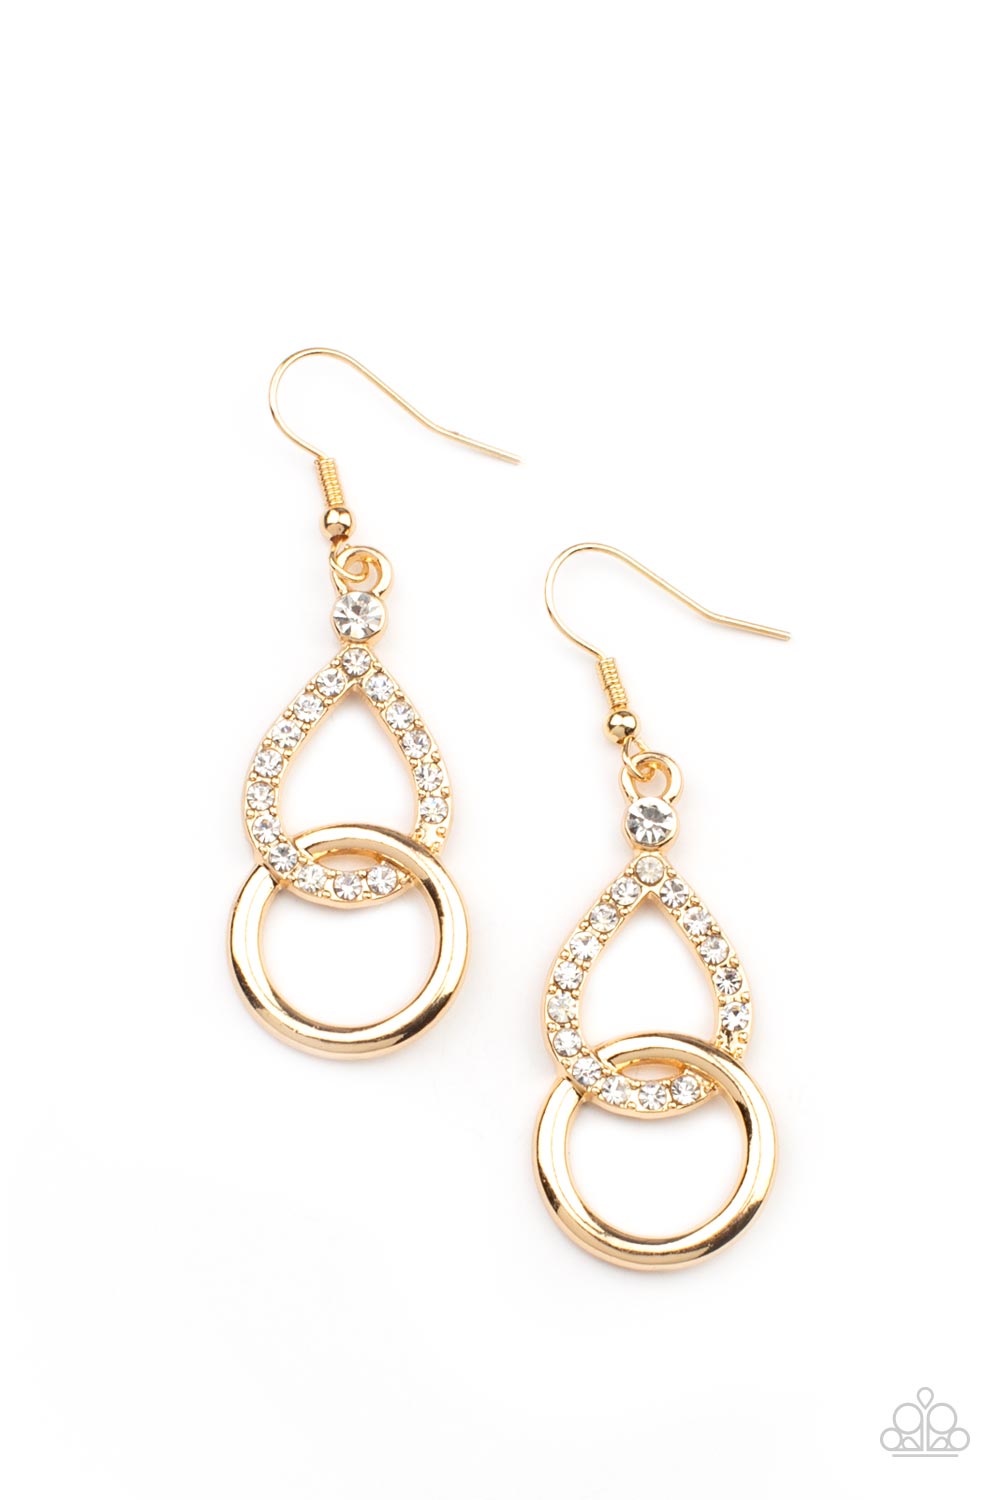 Red Carpet Couture Gold Earrings - Paparazzi Accessories- lightbox - CarasShop.com - $5 Jewelry by Cara Jewels